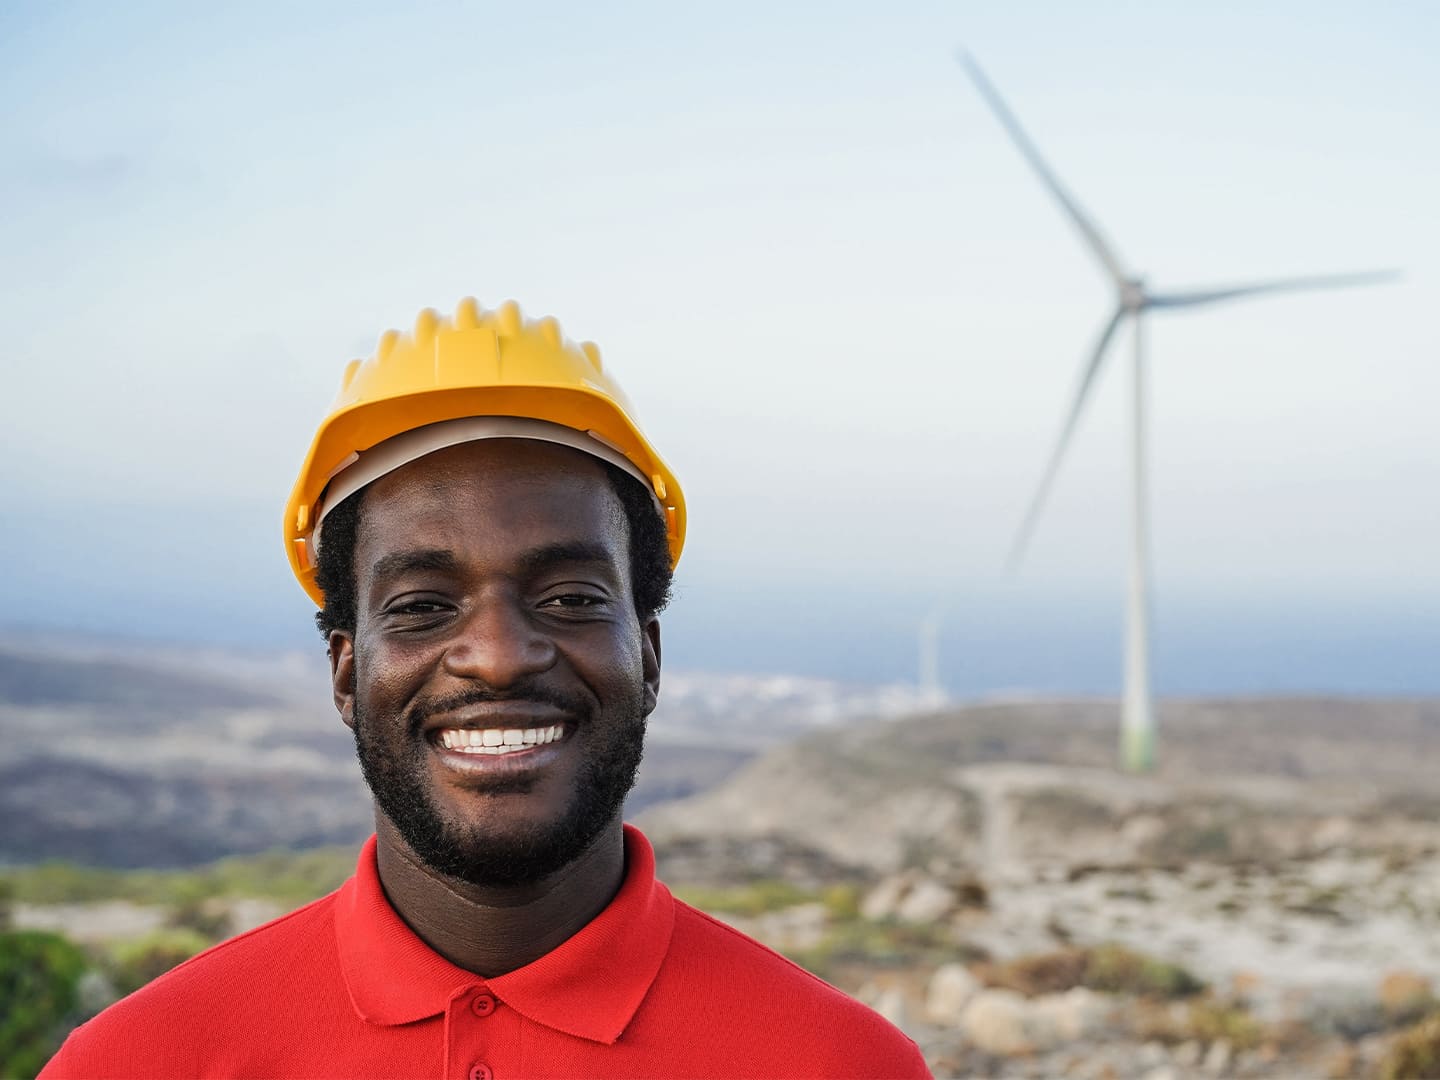 Man in front of a wind turbine